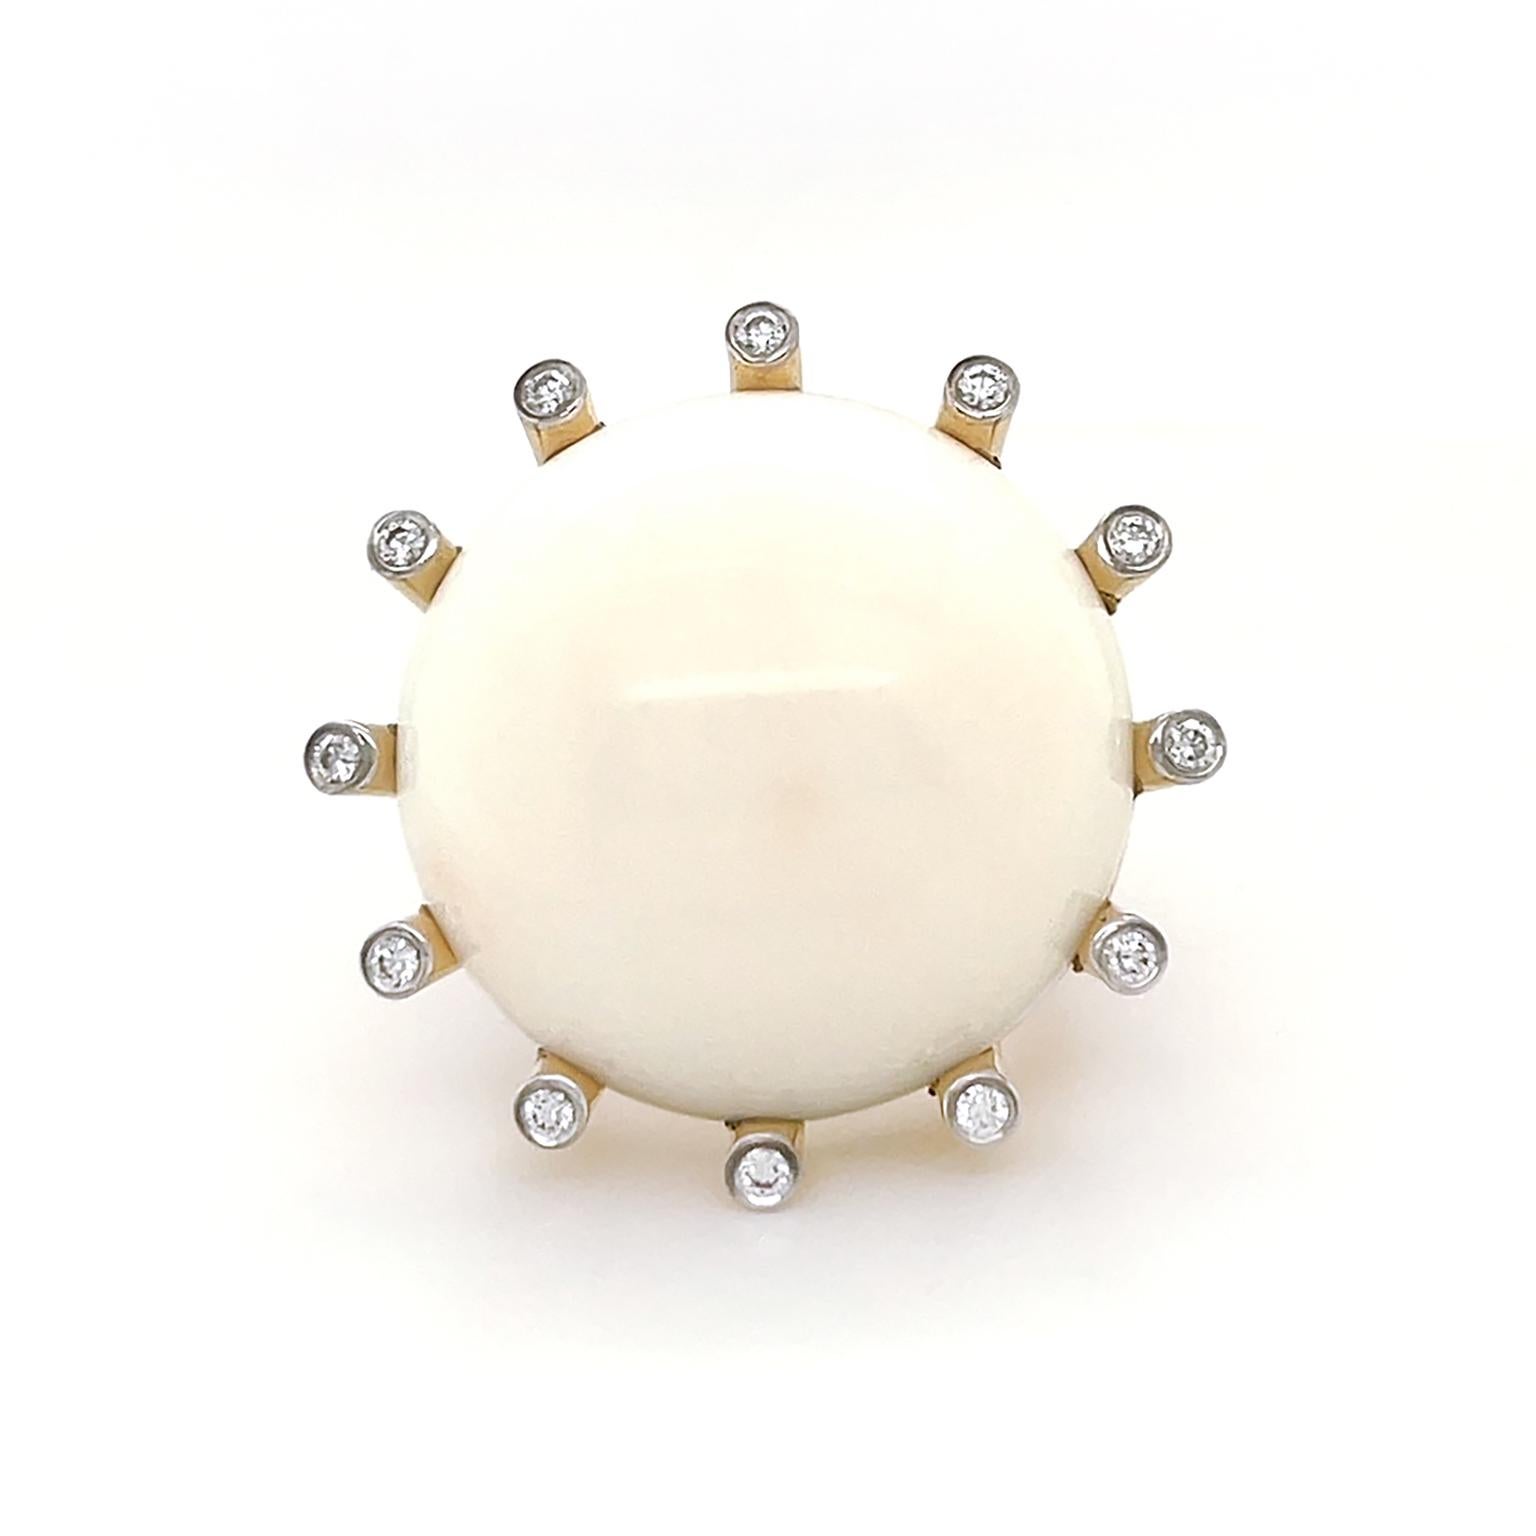 A lustrous white coral embodies the warmth of 18k yellow gold and diamonds for this La Luna ring. Secured by narrow cylinders of 18k yellow gold, the ring features a round 25mm carving of white coral with a single brilliant cut diamond on each tip.